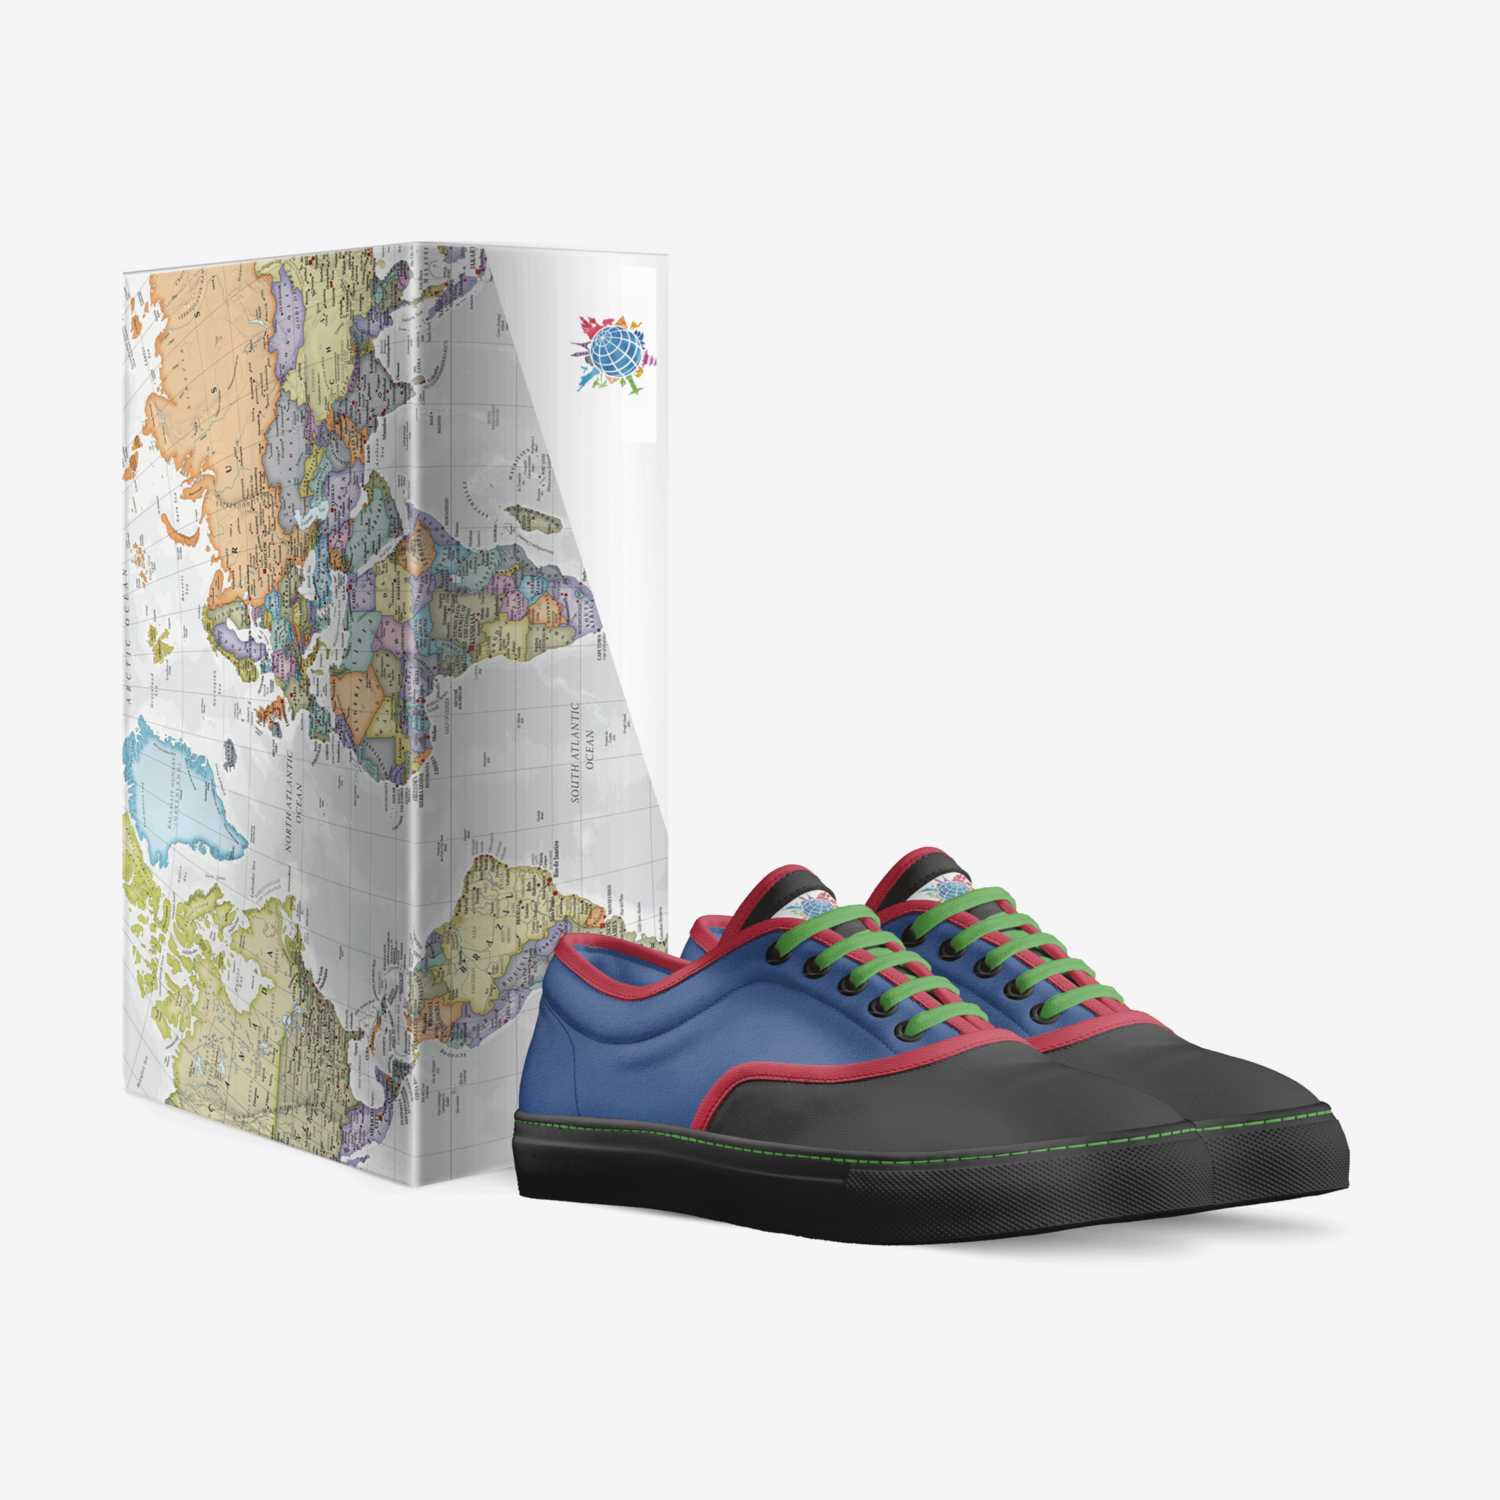 WORLD TRAVELER custom made in Italy shoes by Michael Howell | Box view